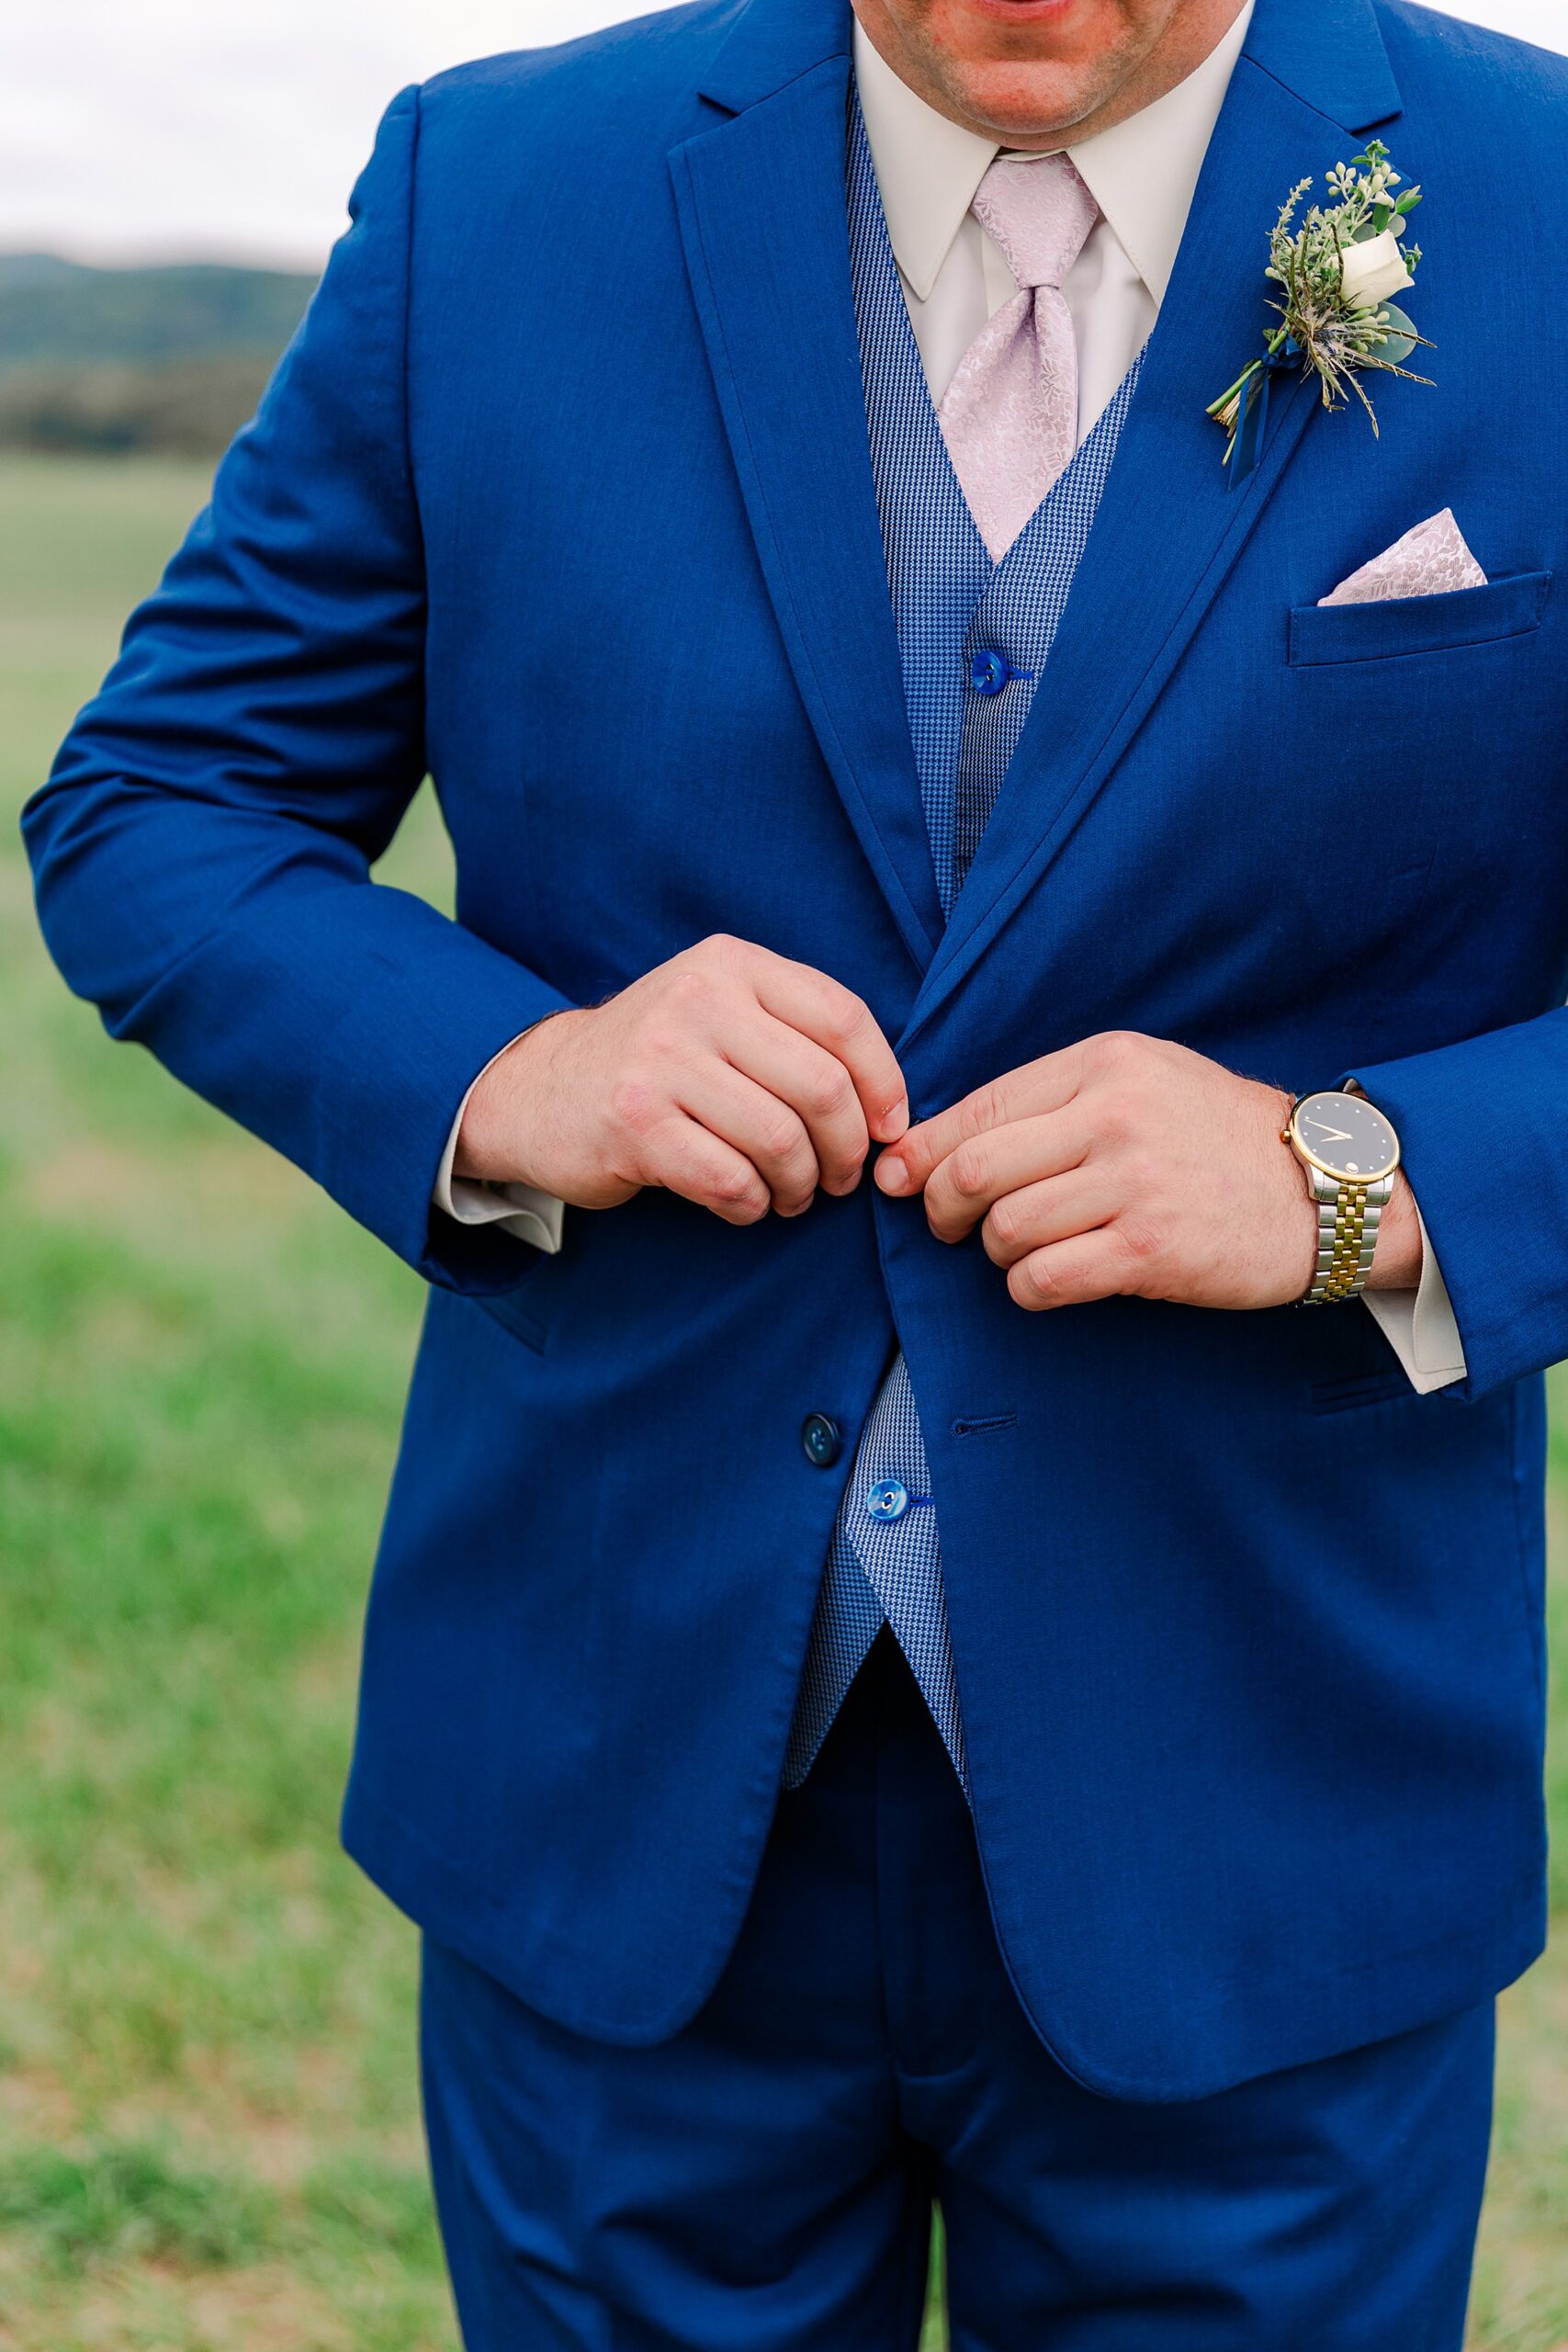 man buttoning a blue suit with gold watch and pink tie